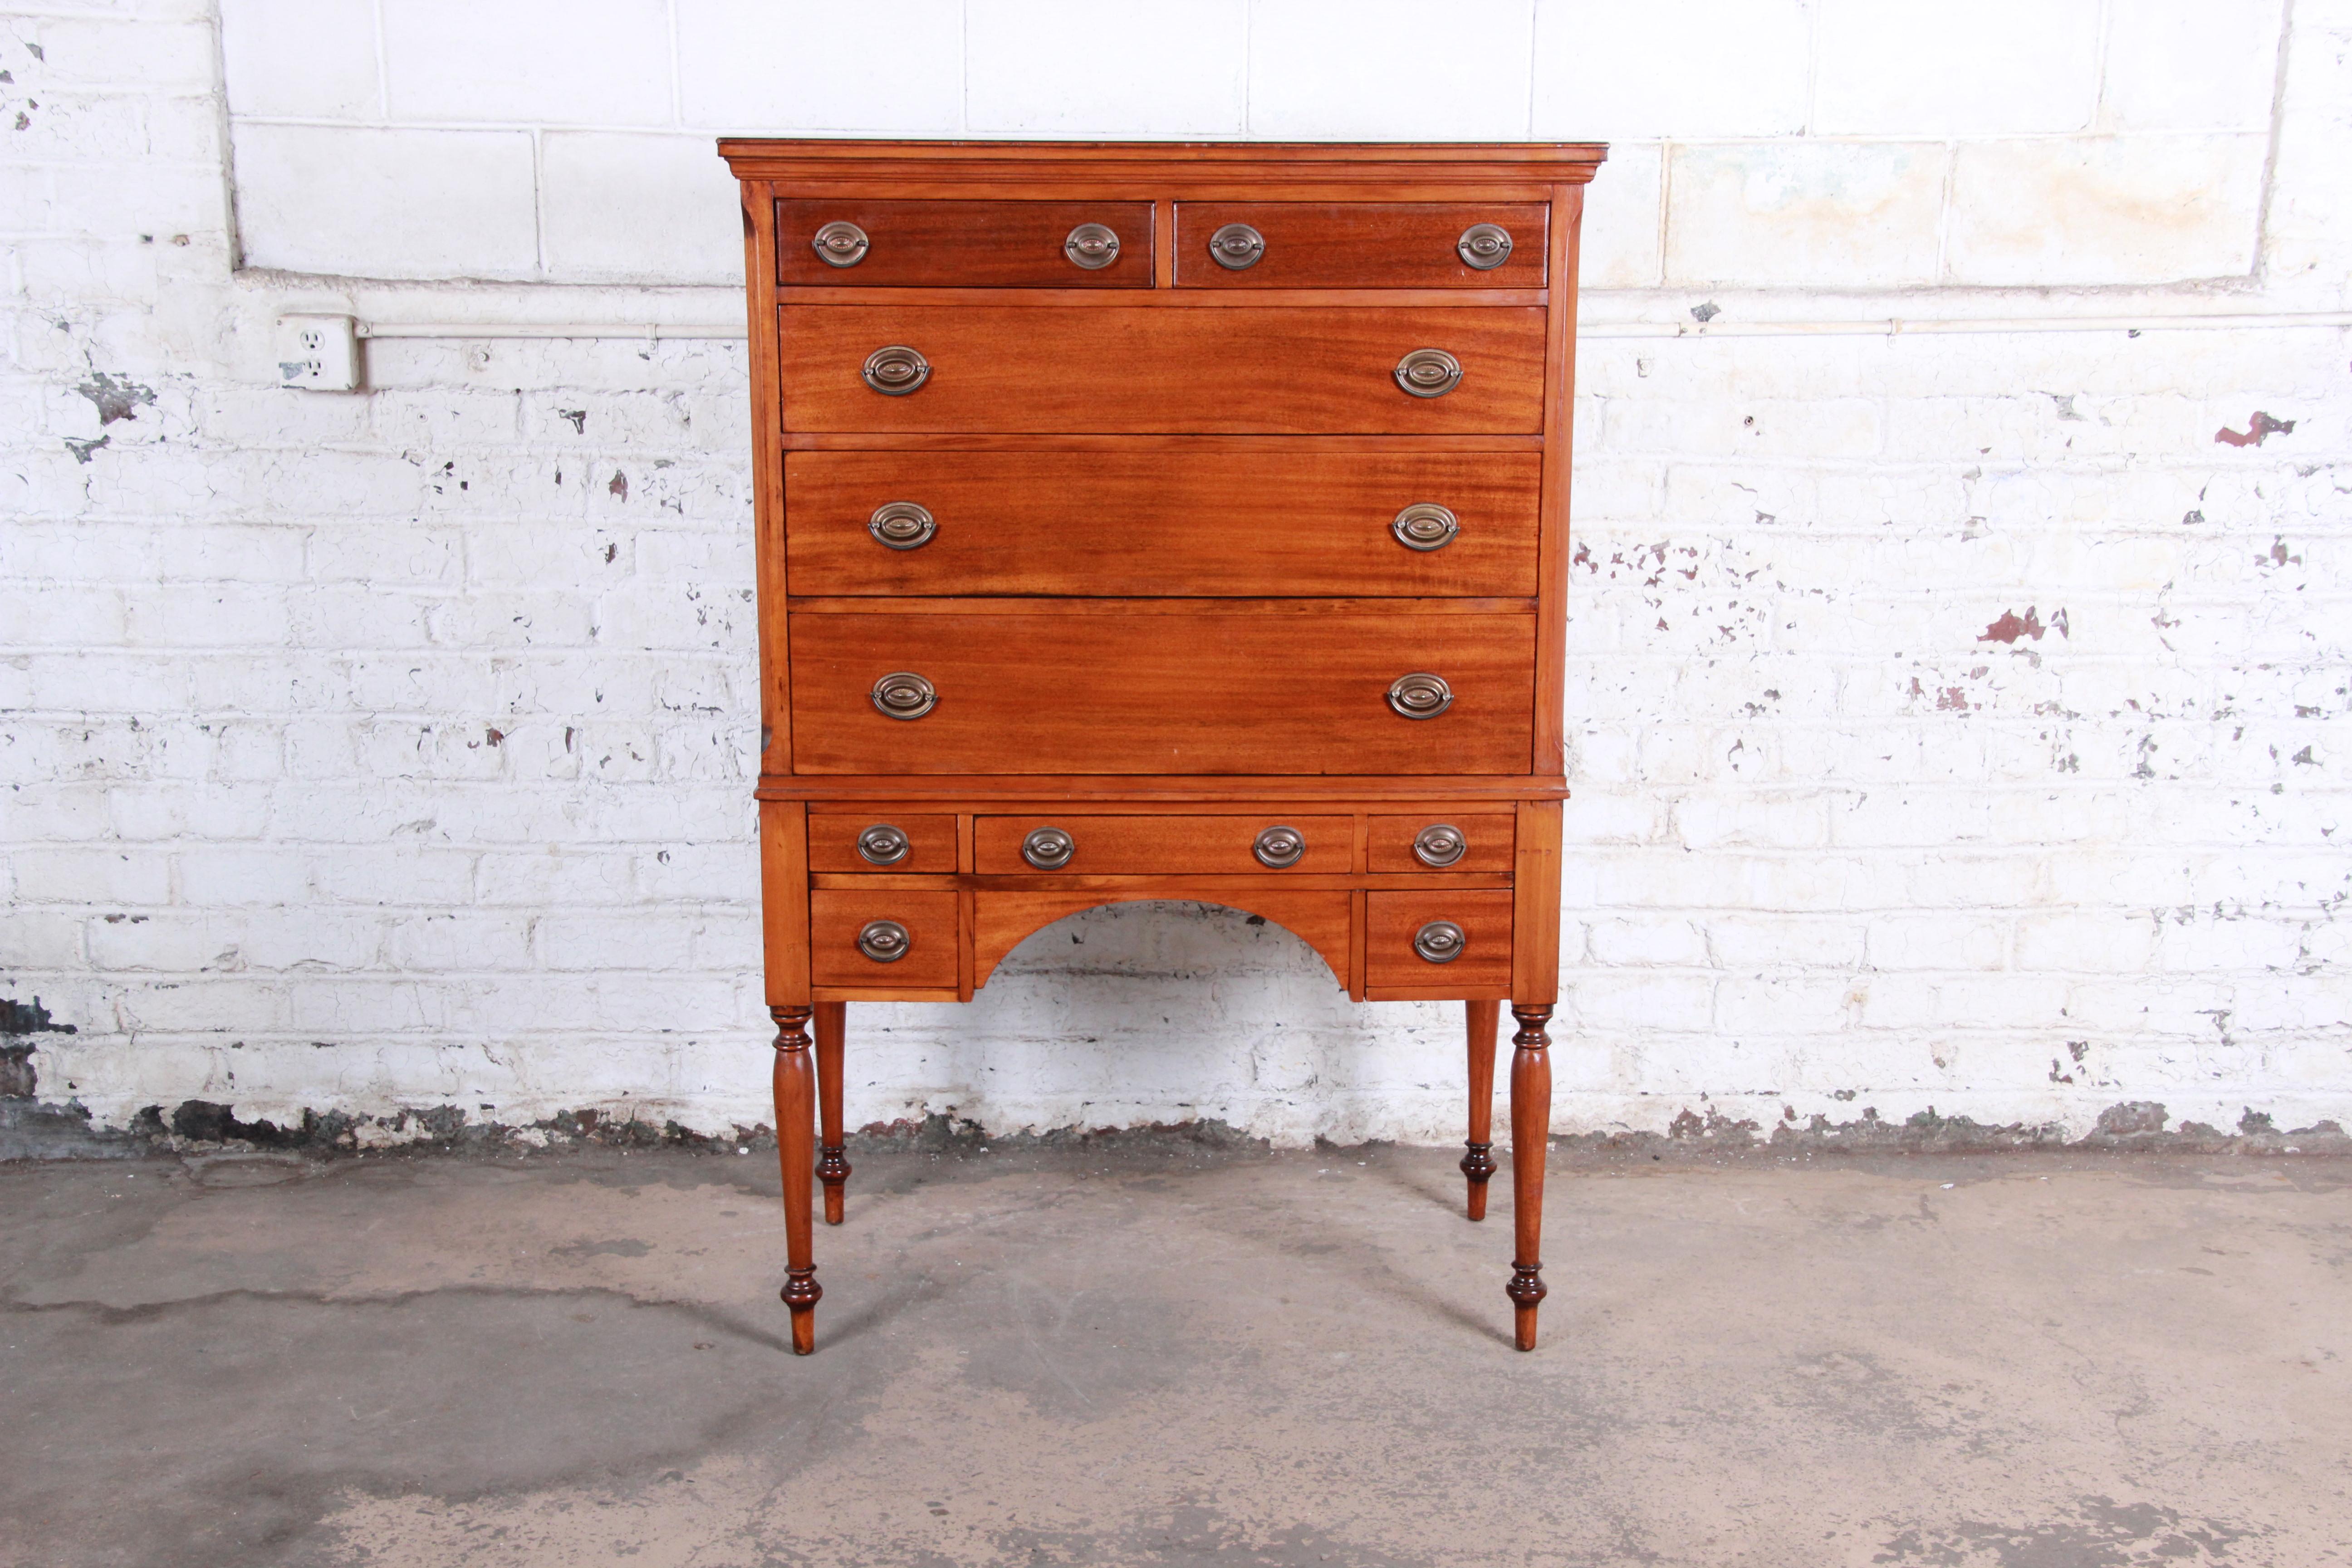 A gorgeous antique mahogany highboy chest by Estey Manufacturing Co. of Owosso, MI. The dresser features stunning mahogany wood grain and a nice traditional colonial style. It offers ample storage, with ten dovetailed drawers. The chest sits on